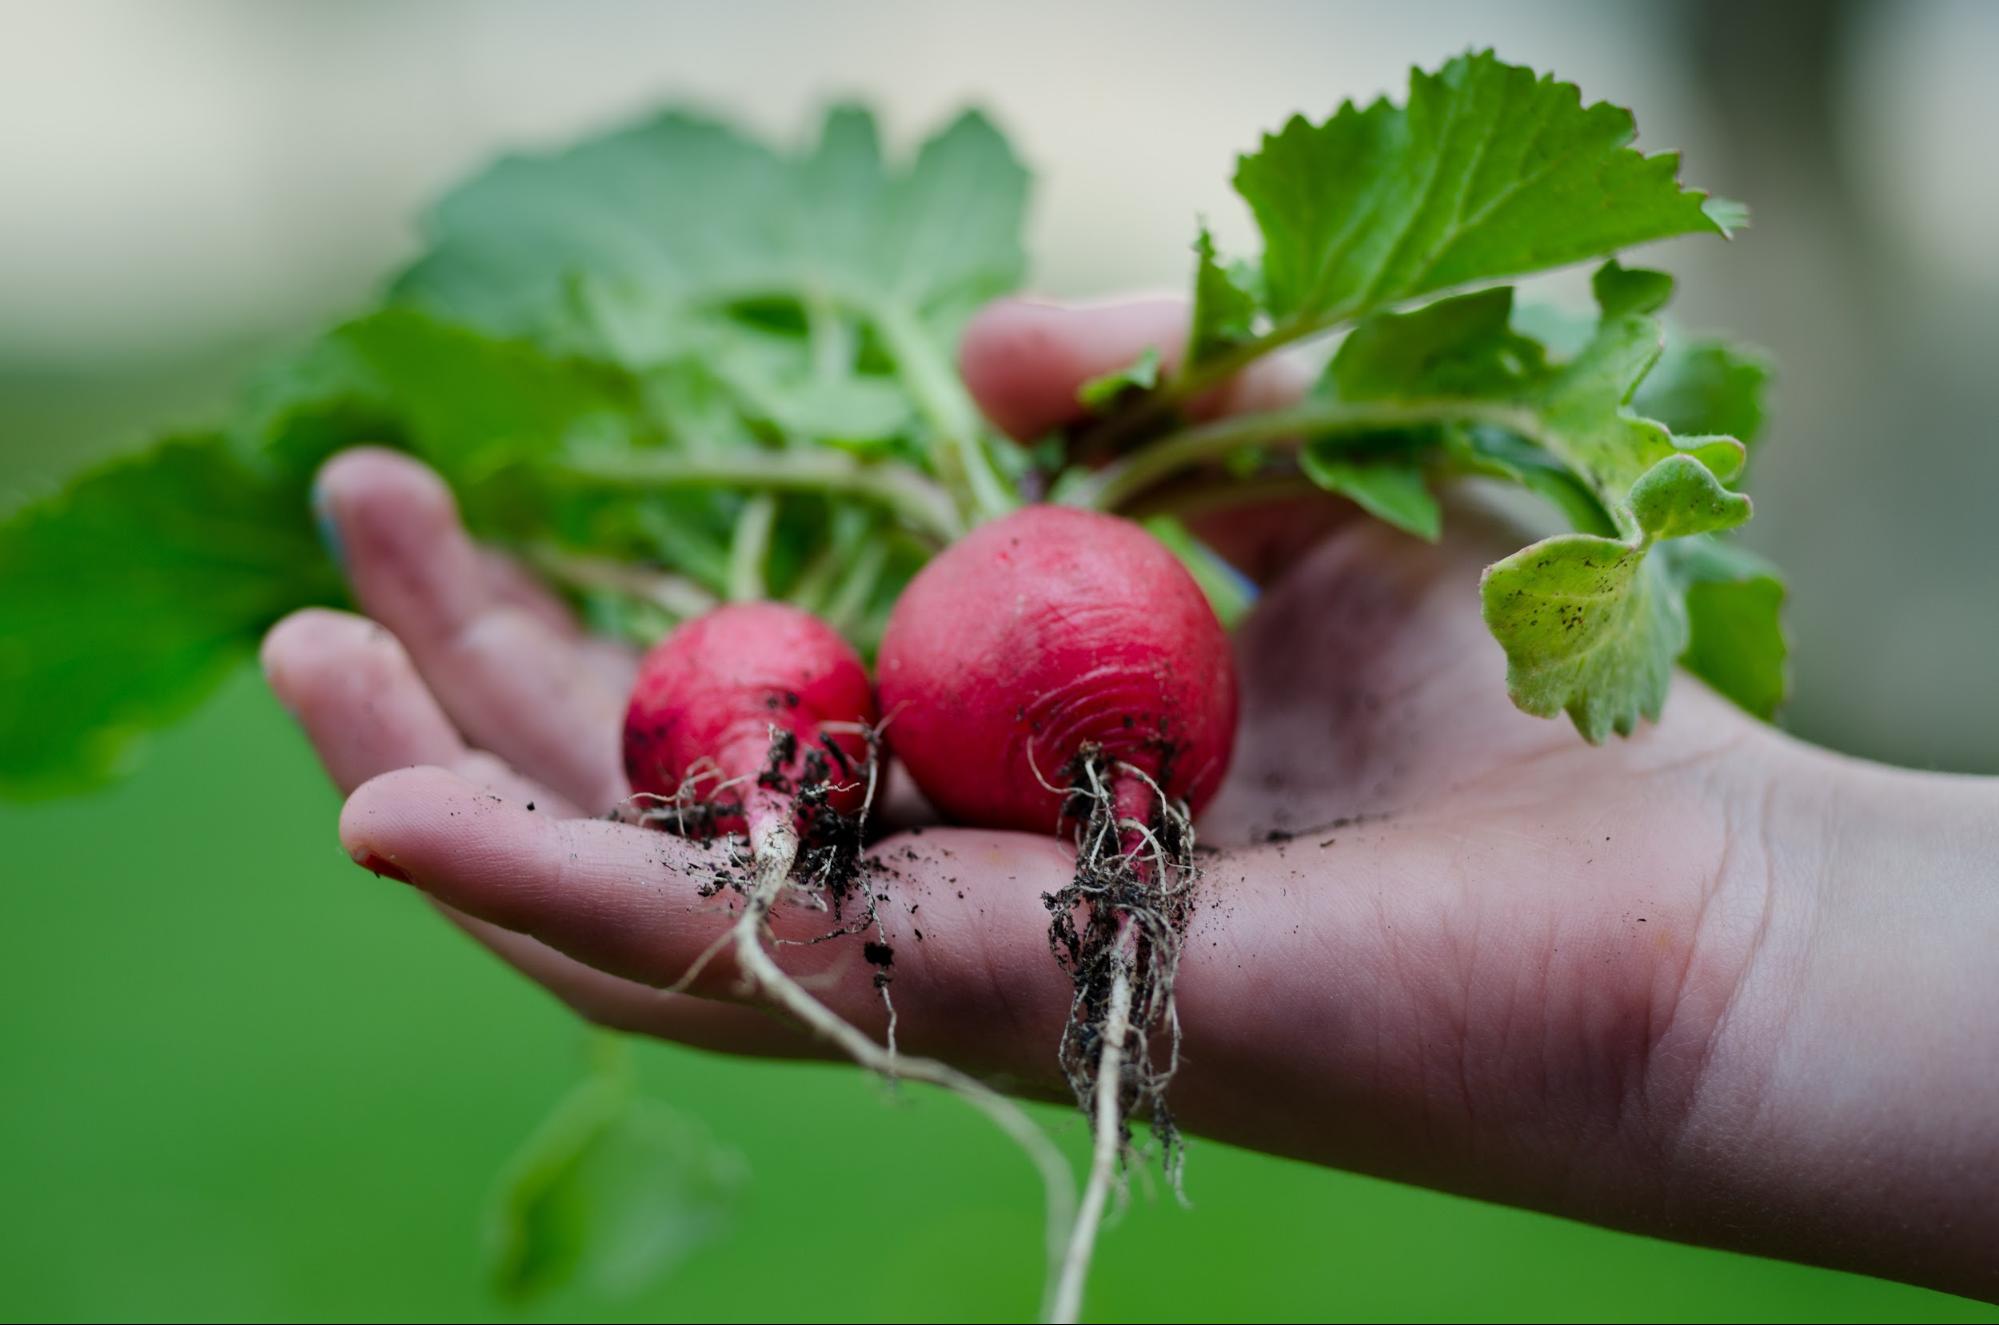 A hand holds two radishes with soil-covered roots that have just been harvested